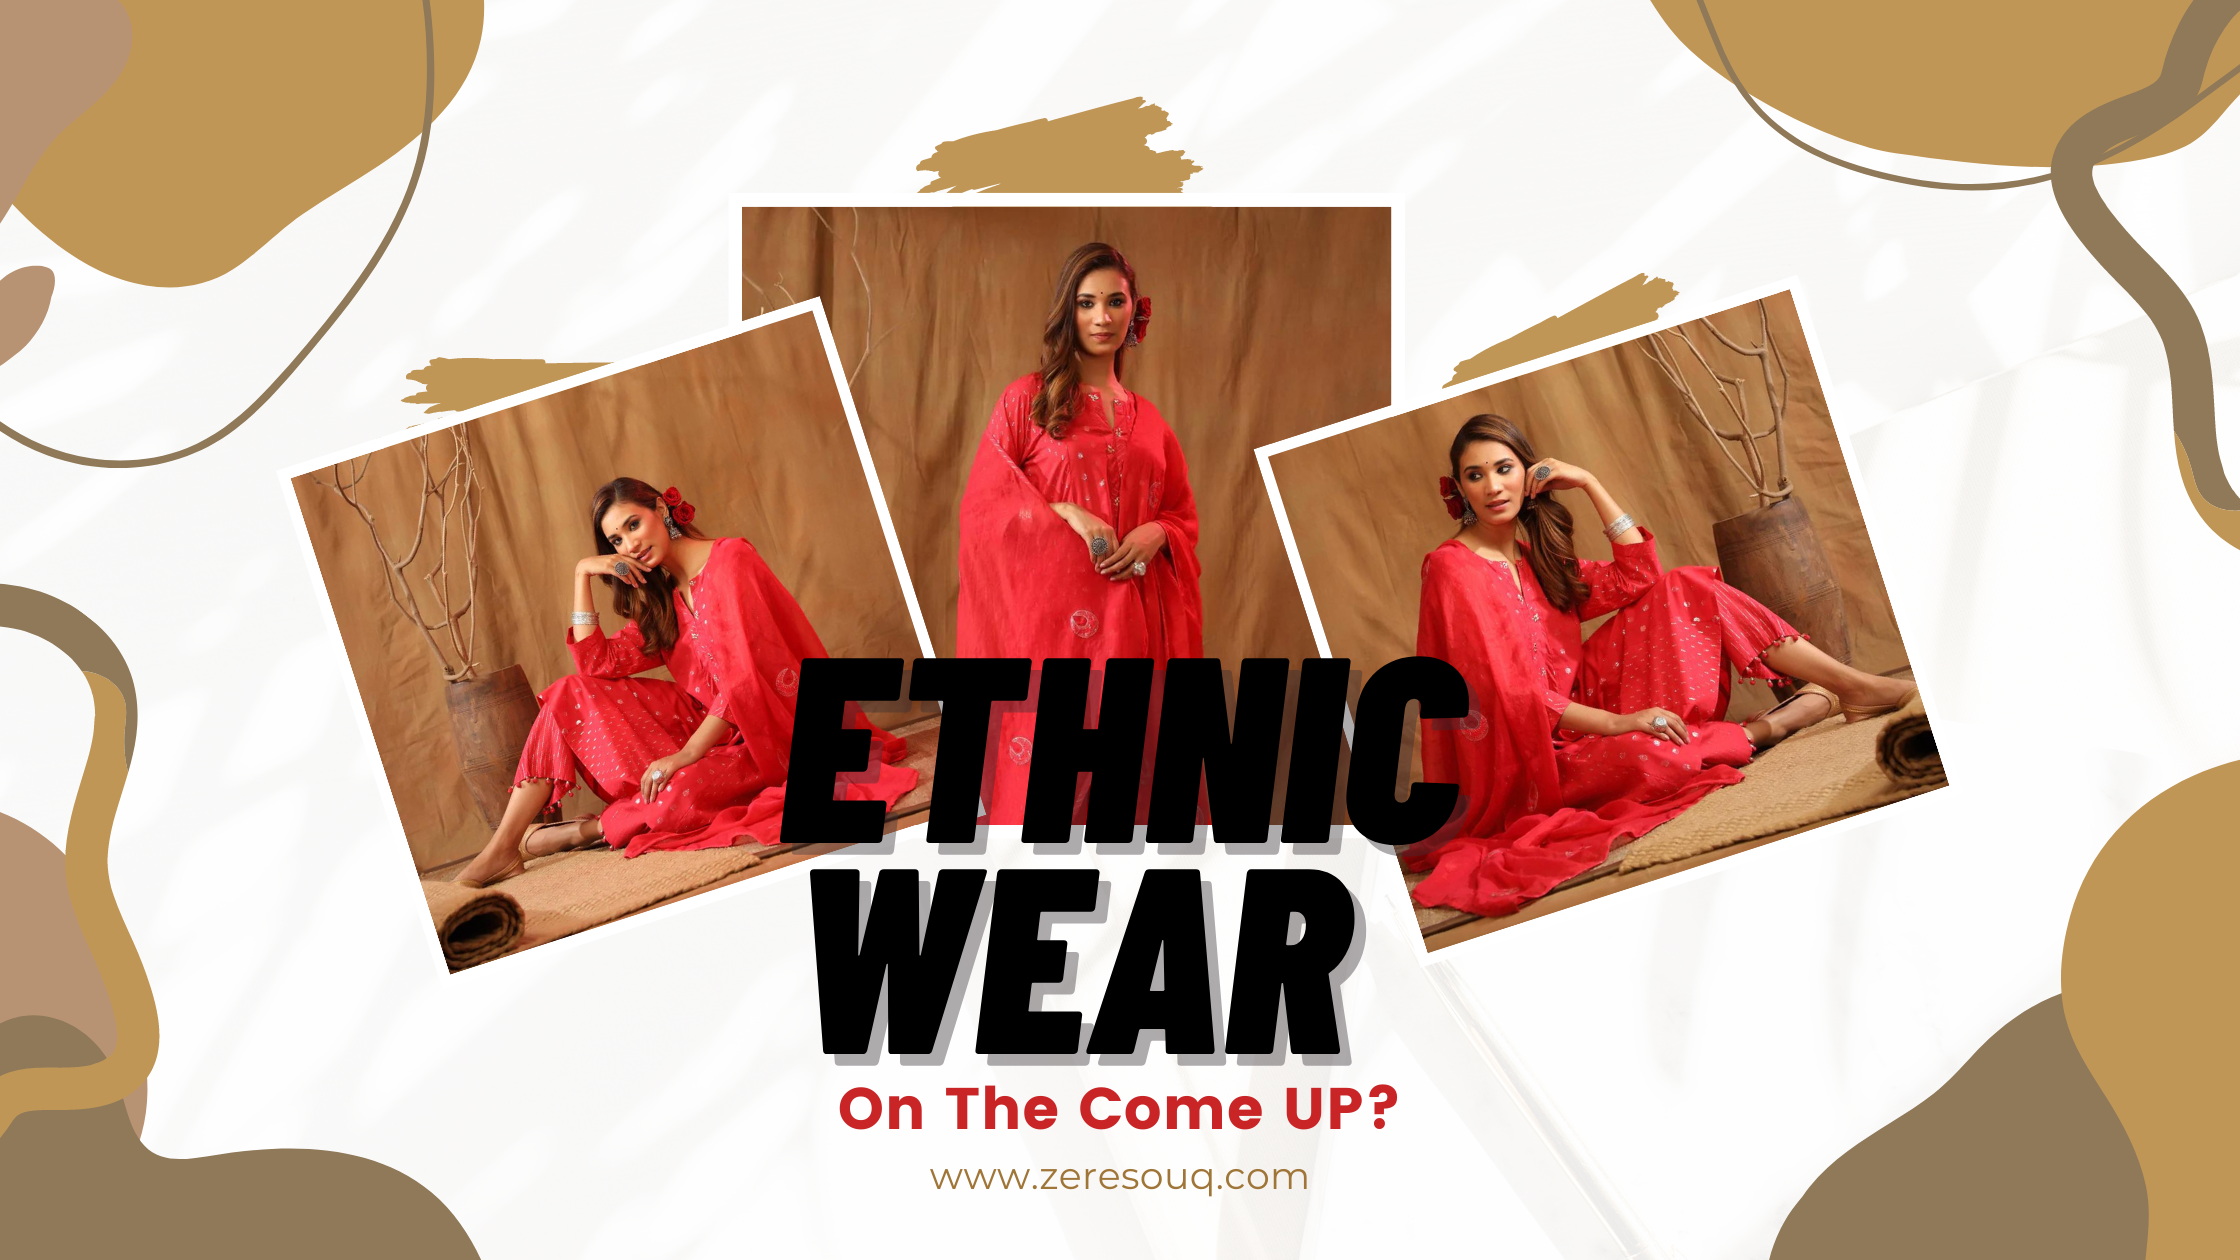 Why is Ethnic Wear Shopping Getting More Popular in the Past Decade?